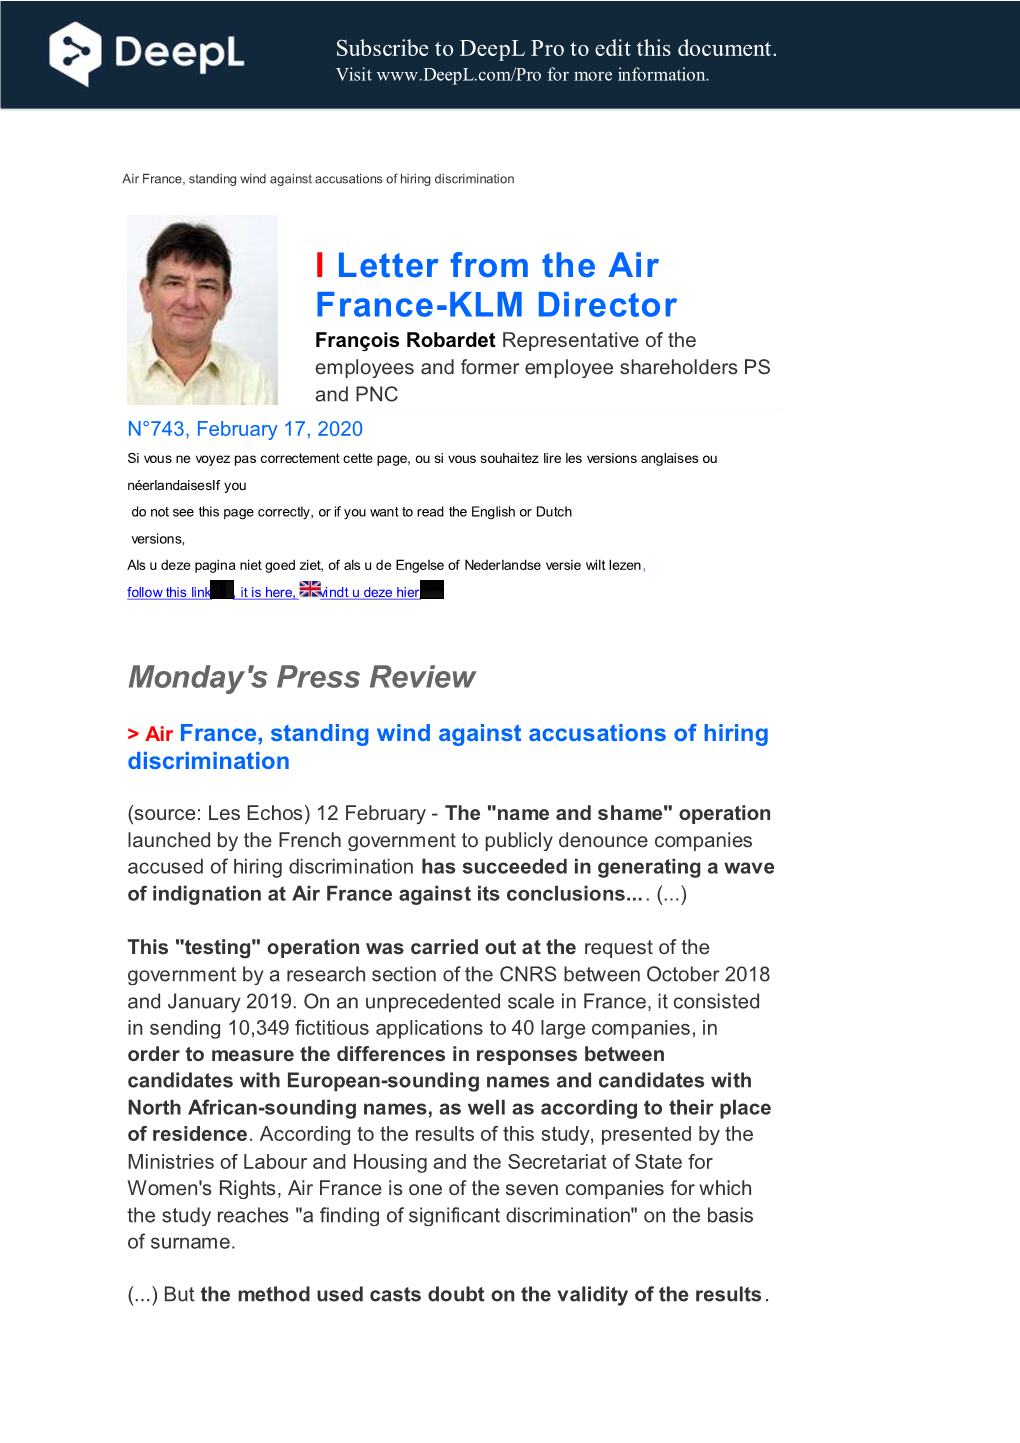 I Letter from the Air France-KLM Director